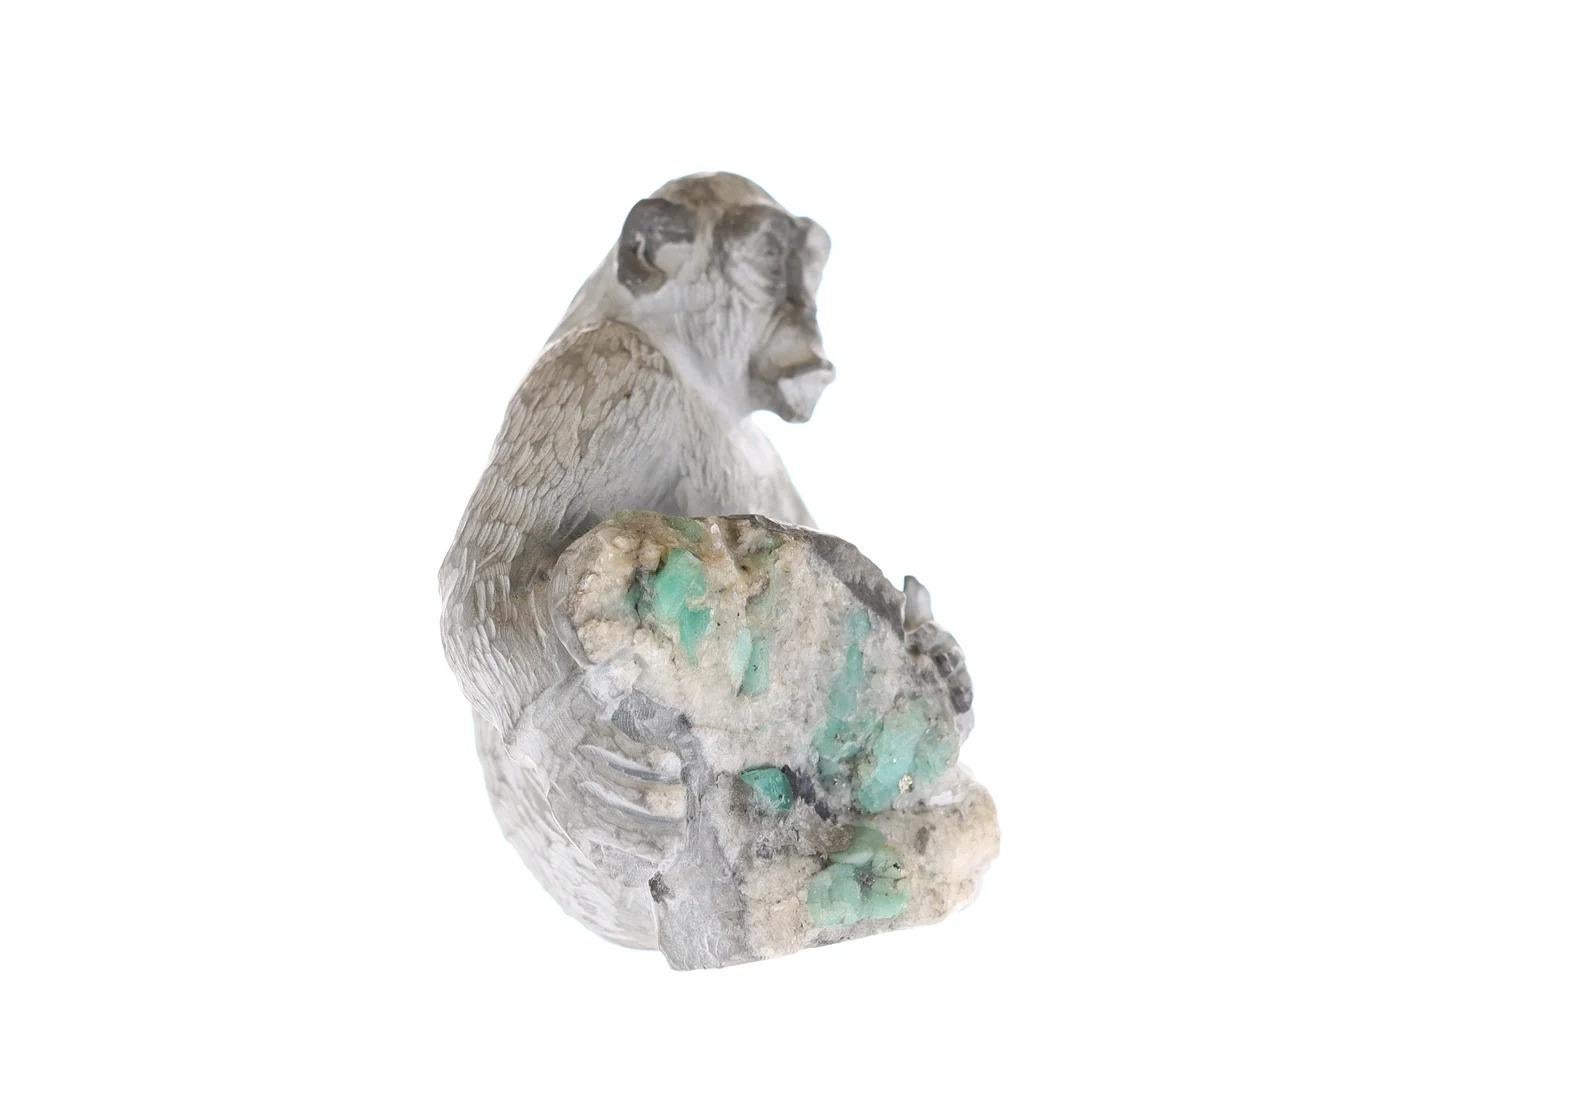 This is a beautiful and one-of-a-kind rough Colombian emerald sculpture. Featuring an incredible chimpanzee, in its natural habitat. Made of white and gray shale, as it holds a stomp of pure natural Colombian emerald roughs. It simply cannot get any